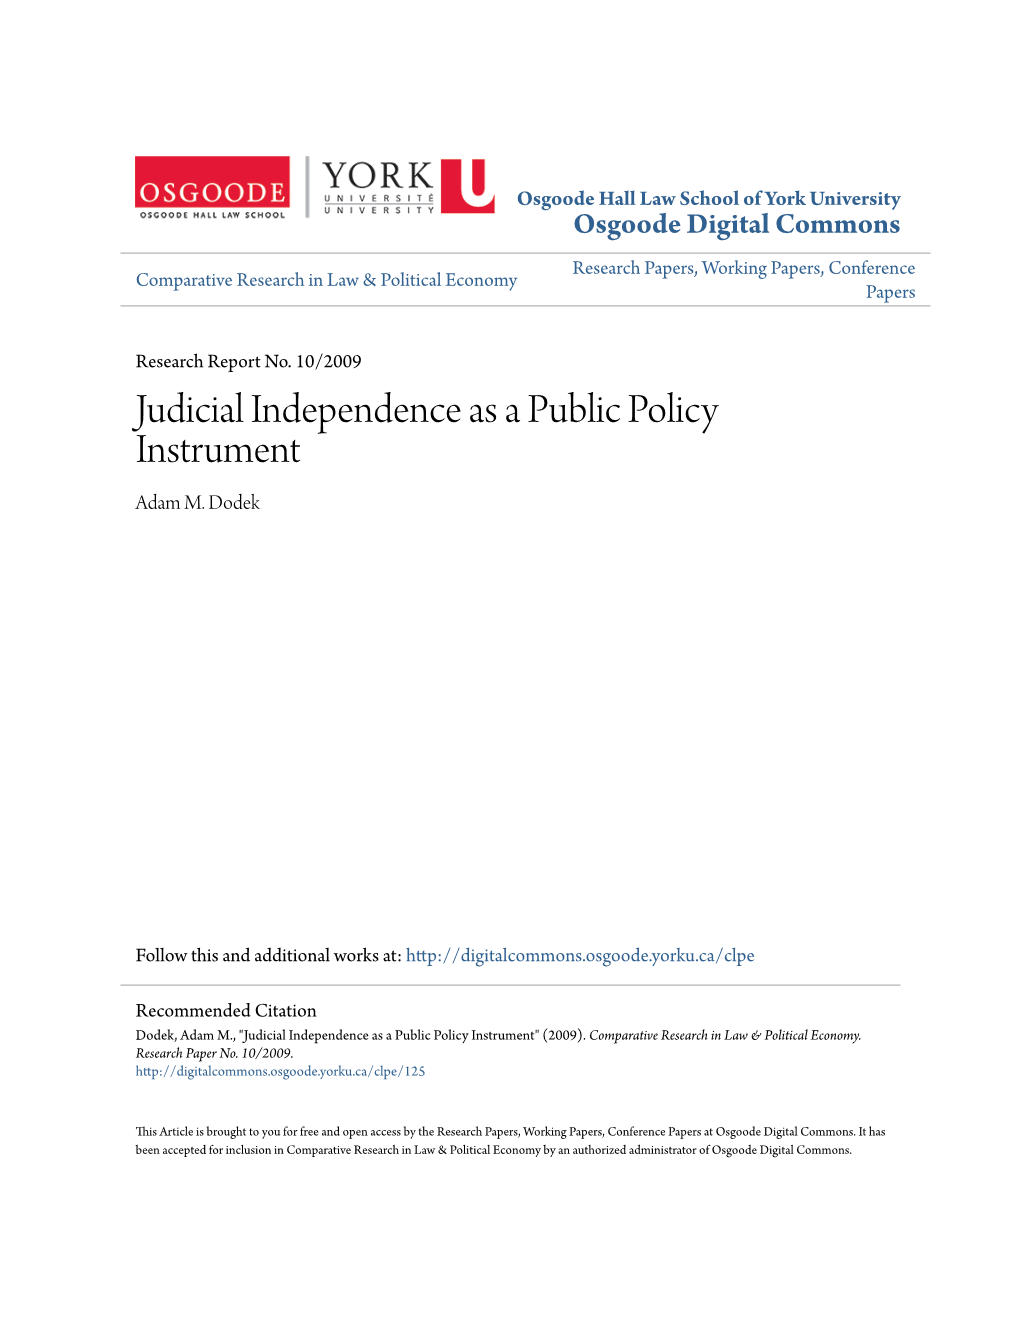 Judicial Independence As a Public Policy Instrument Adam M